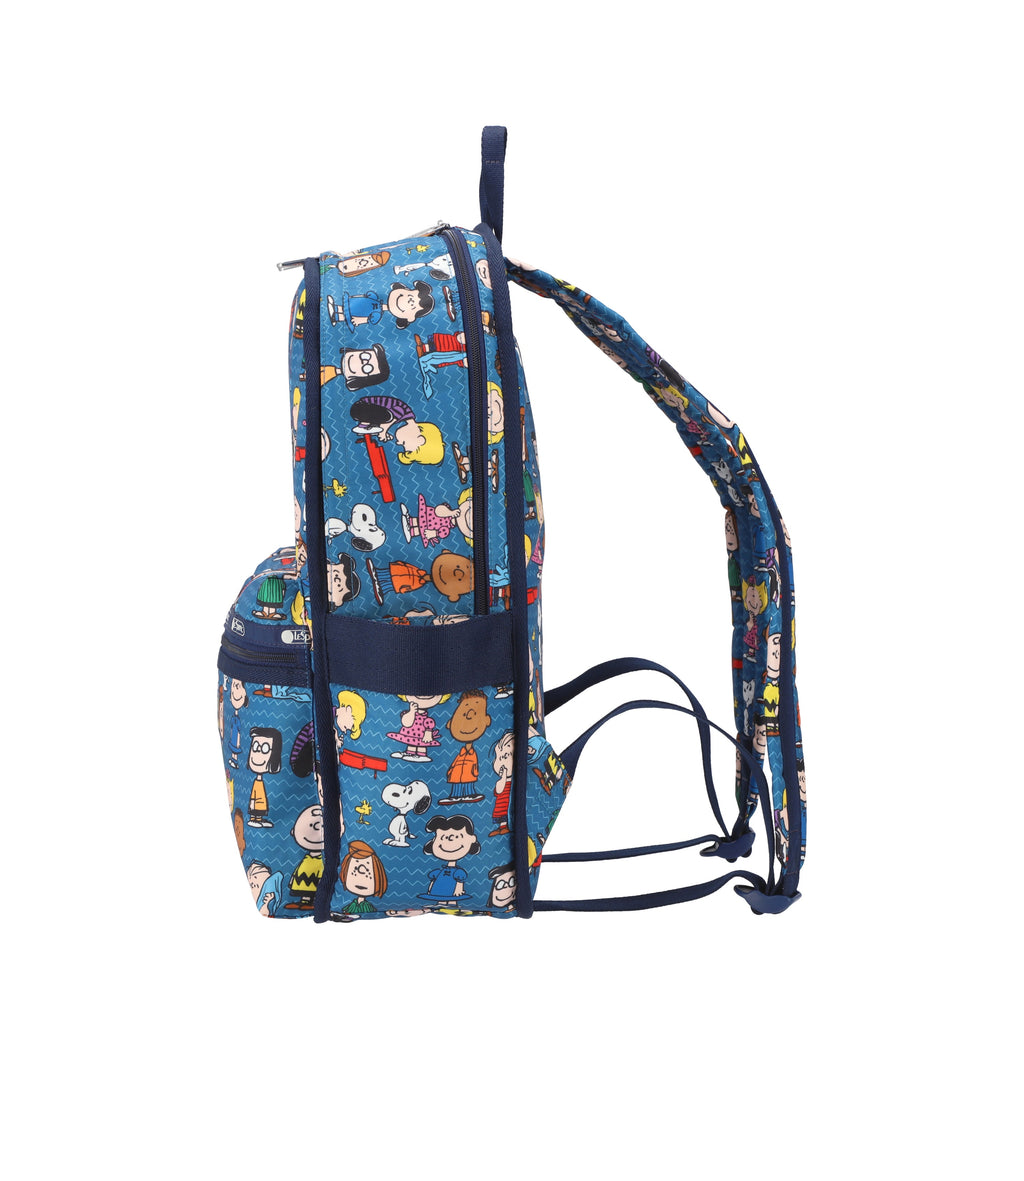 Route Backpack - 24545271250992